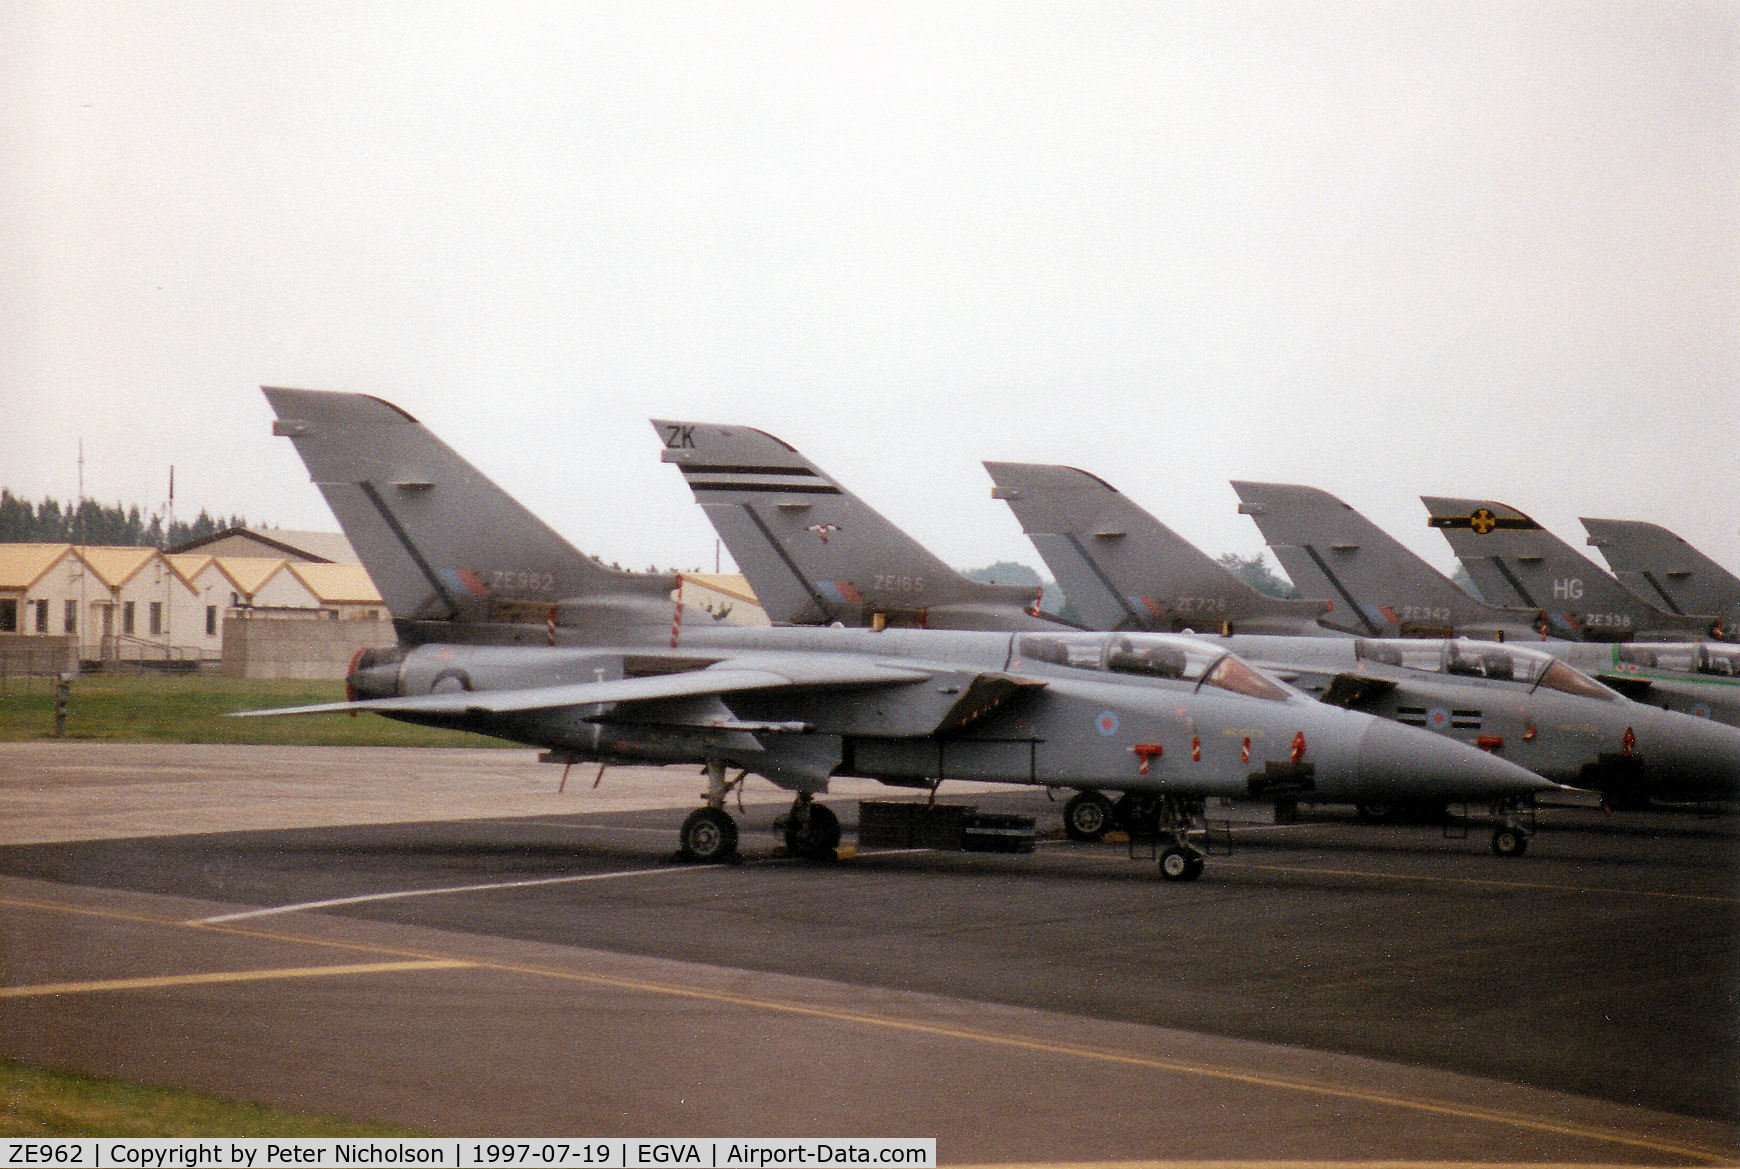 ZE962, 1989 Panavia Tornado F.3 C/N 3372, Tornado F.3 of RAF Leeming's 25 Squadron at the head of other such aircraft on the flight-line at the 1997 Intnl Air Tattoo at RAF Fairford.